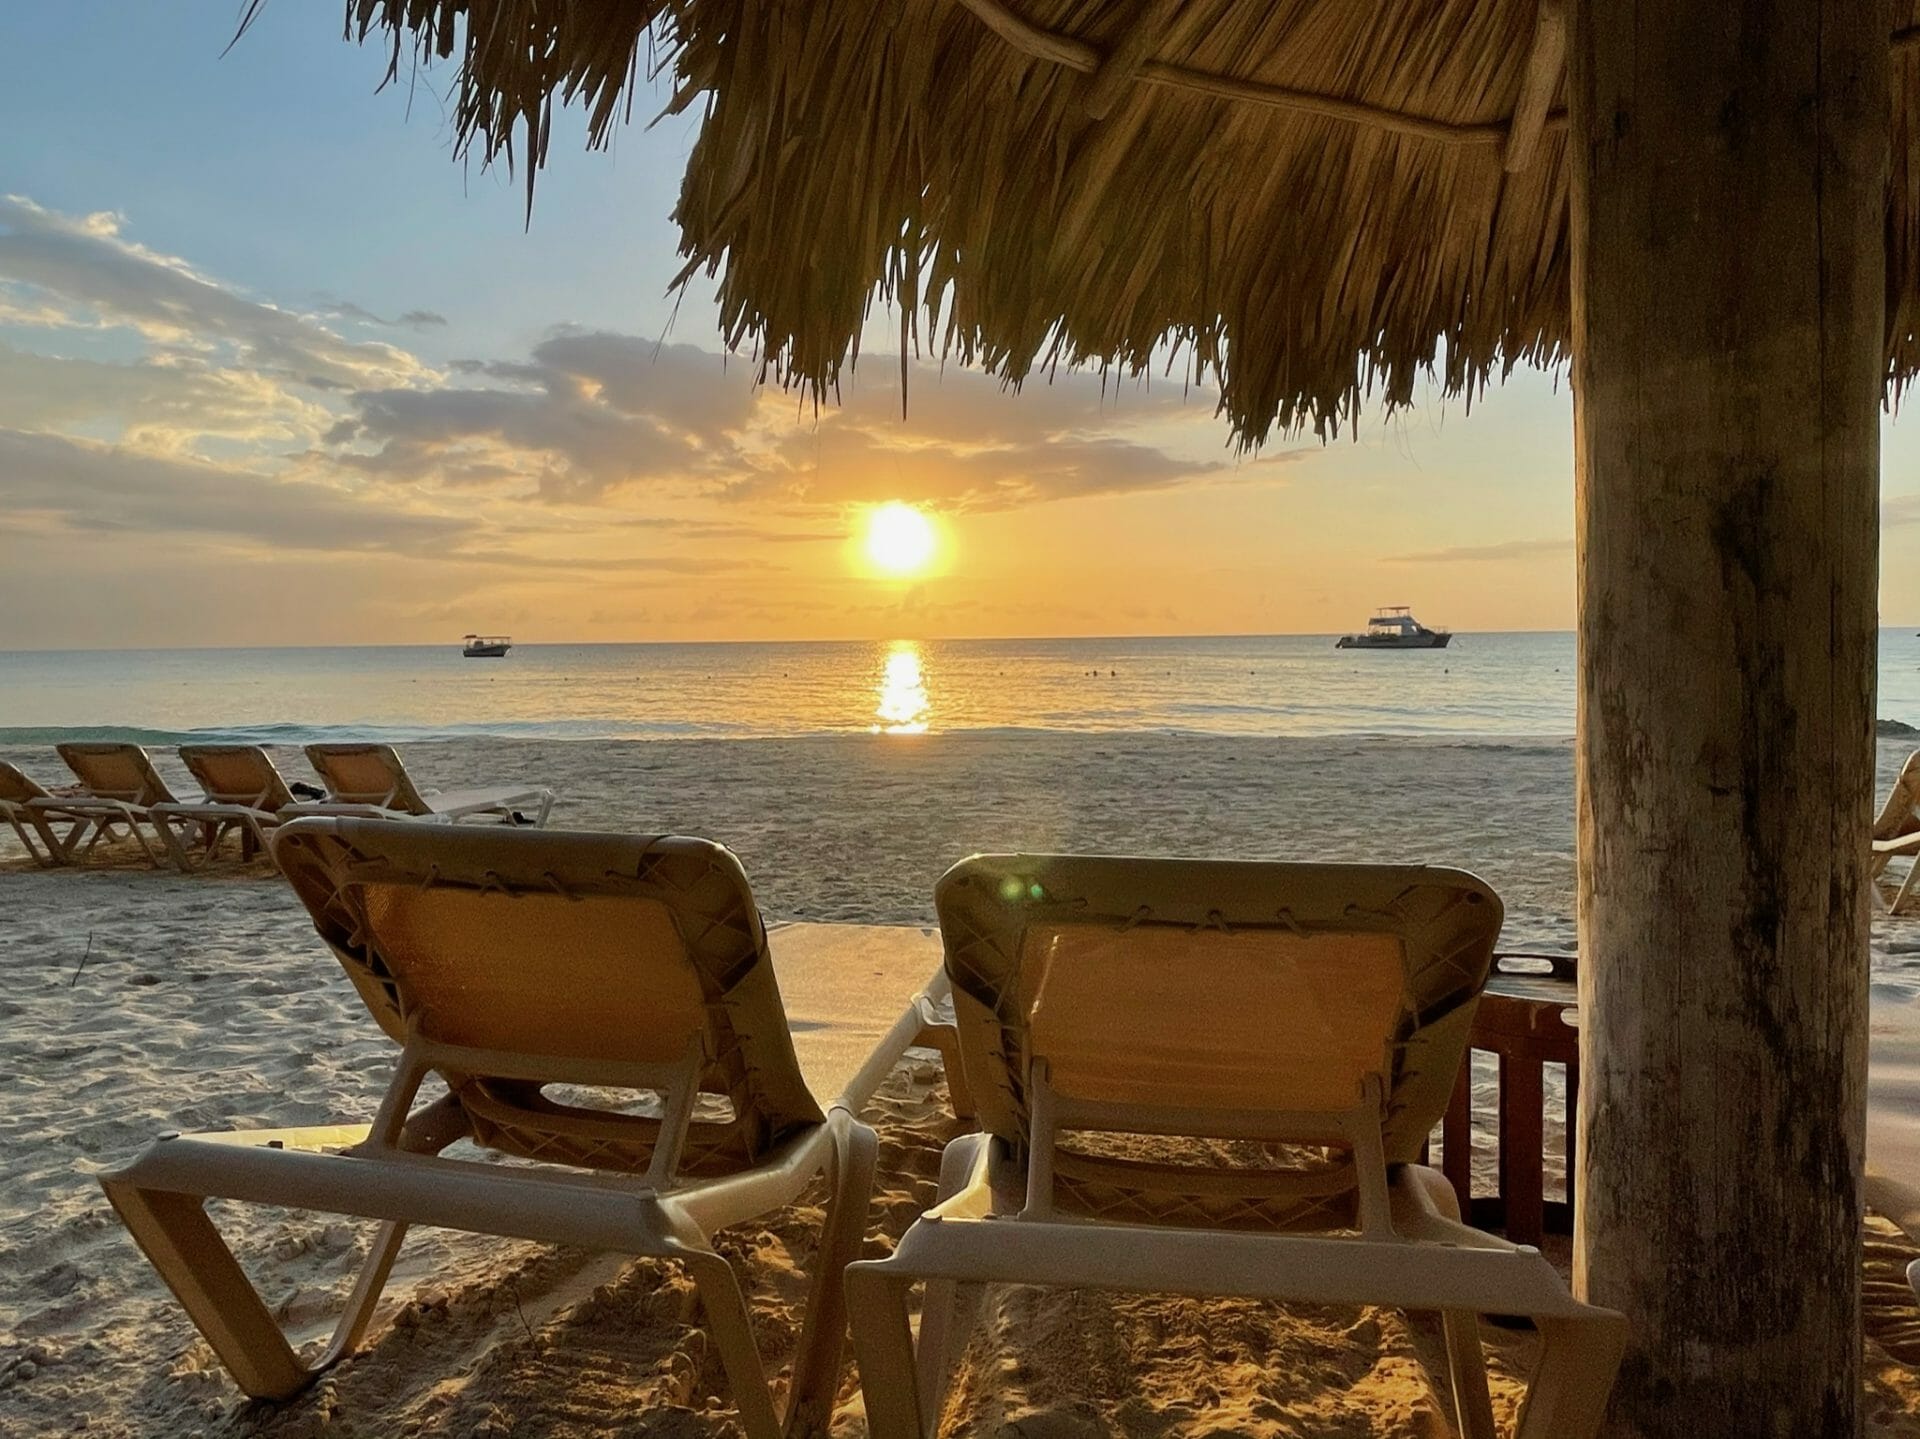 SANDALS ROYAL CARIBBEAN RESORT AND PRIVATE ISLAND - Updated 2022 Prices & Resort (All-Inclusive) Reviews (Montego Bay, Jamaica)